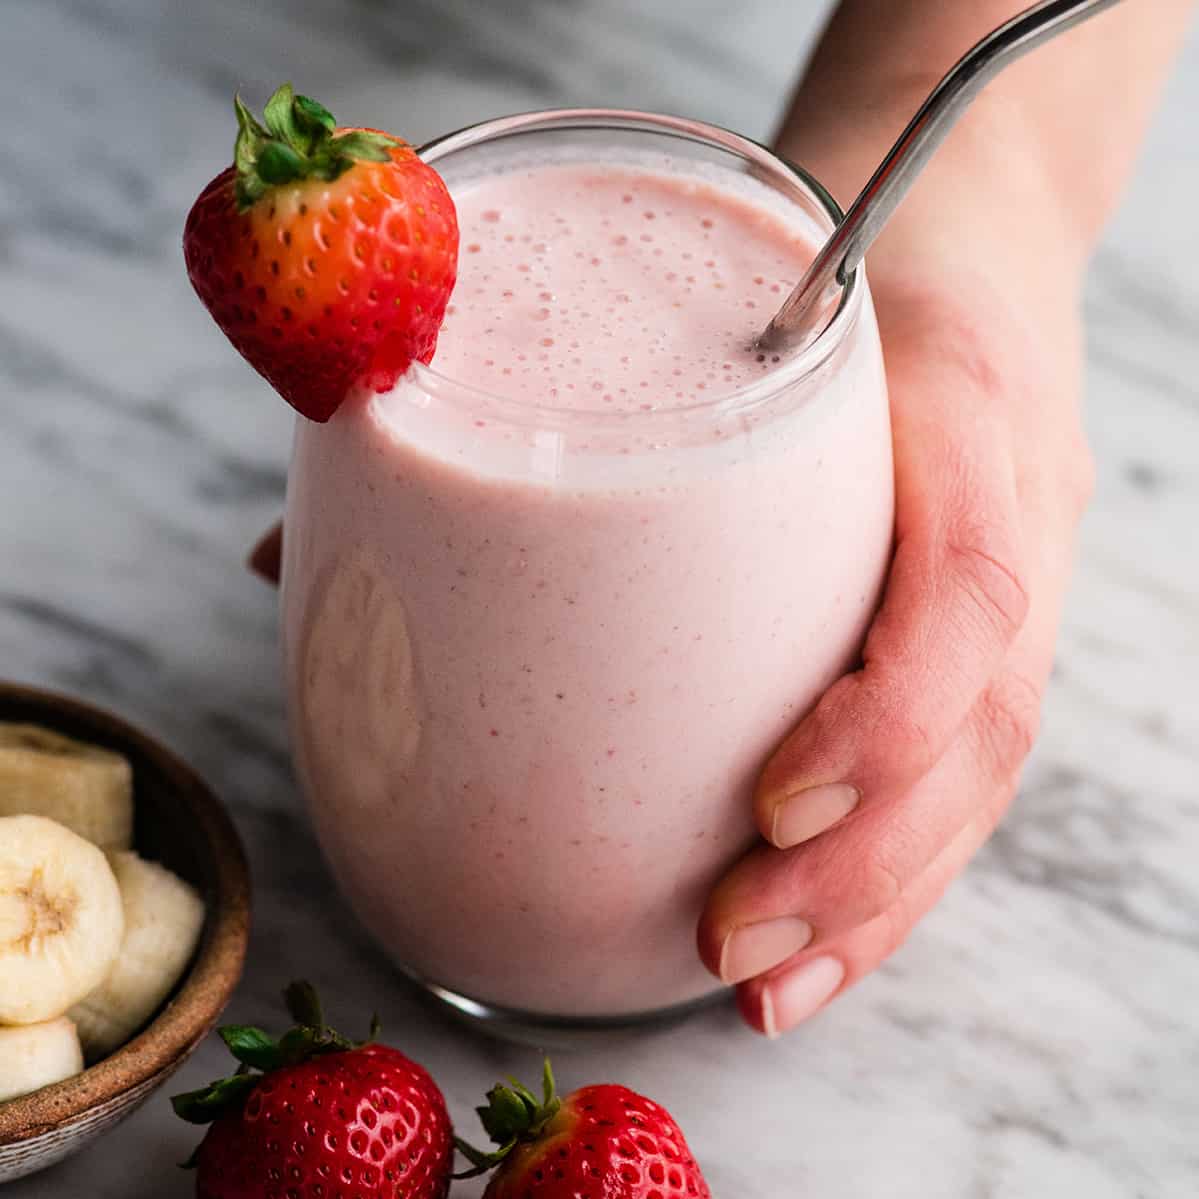 hand holding a glass filled with strawberry banana smoothie with a straw and strawberries.